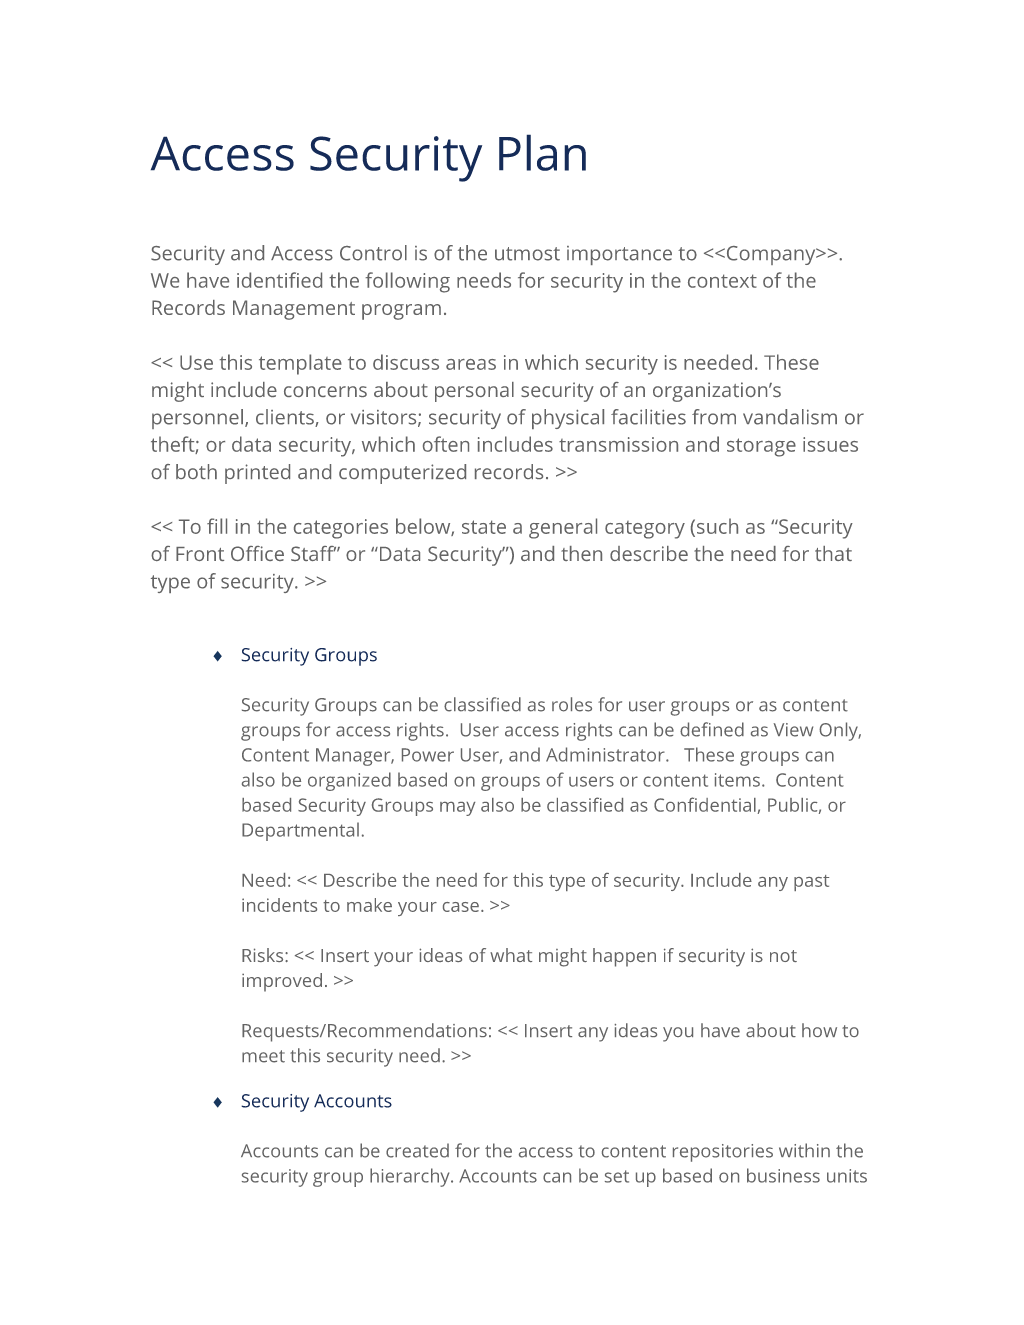 Records Access Security Plan (Expanded) Template Download